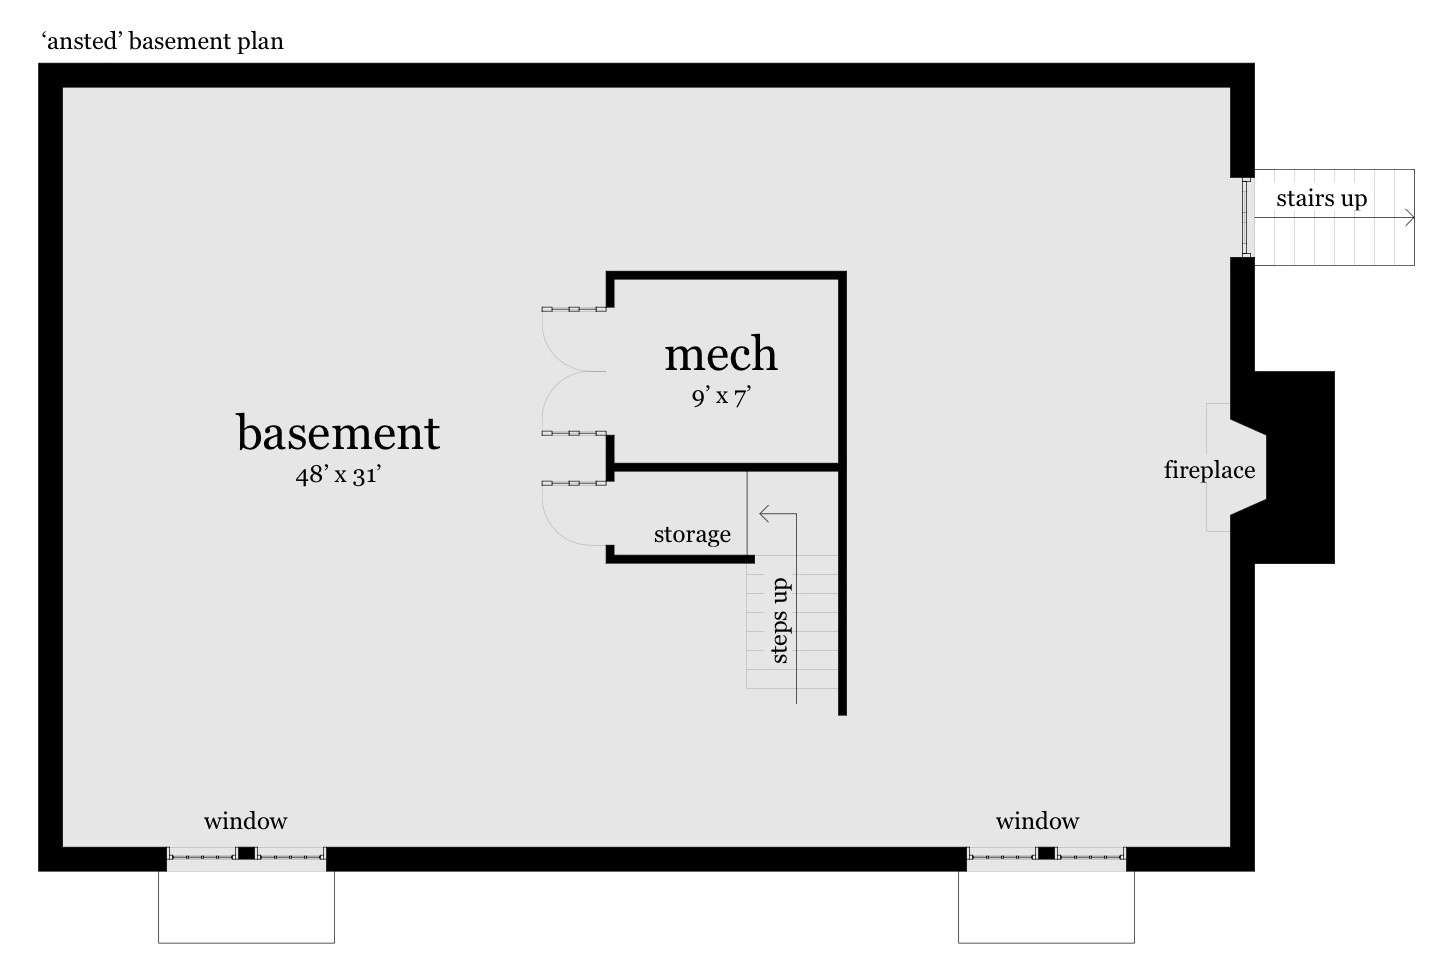 Basement plan. Ansted by Tyree House Plans.